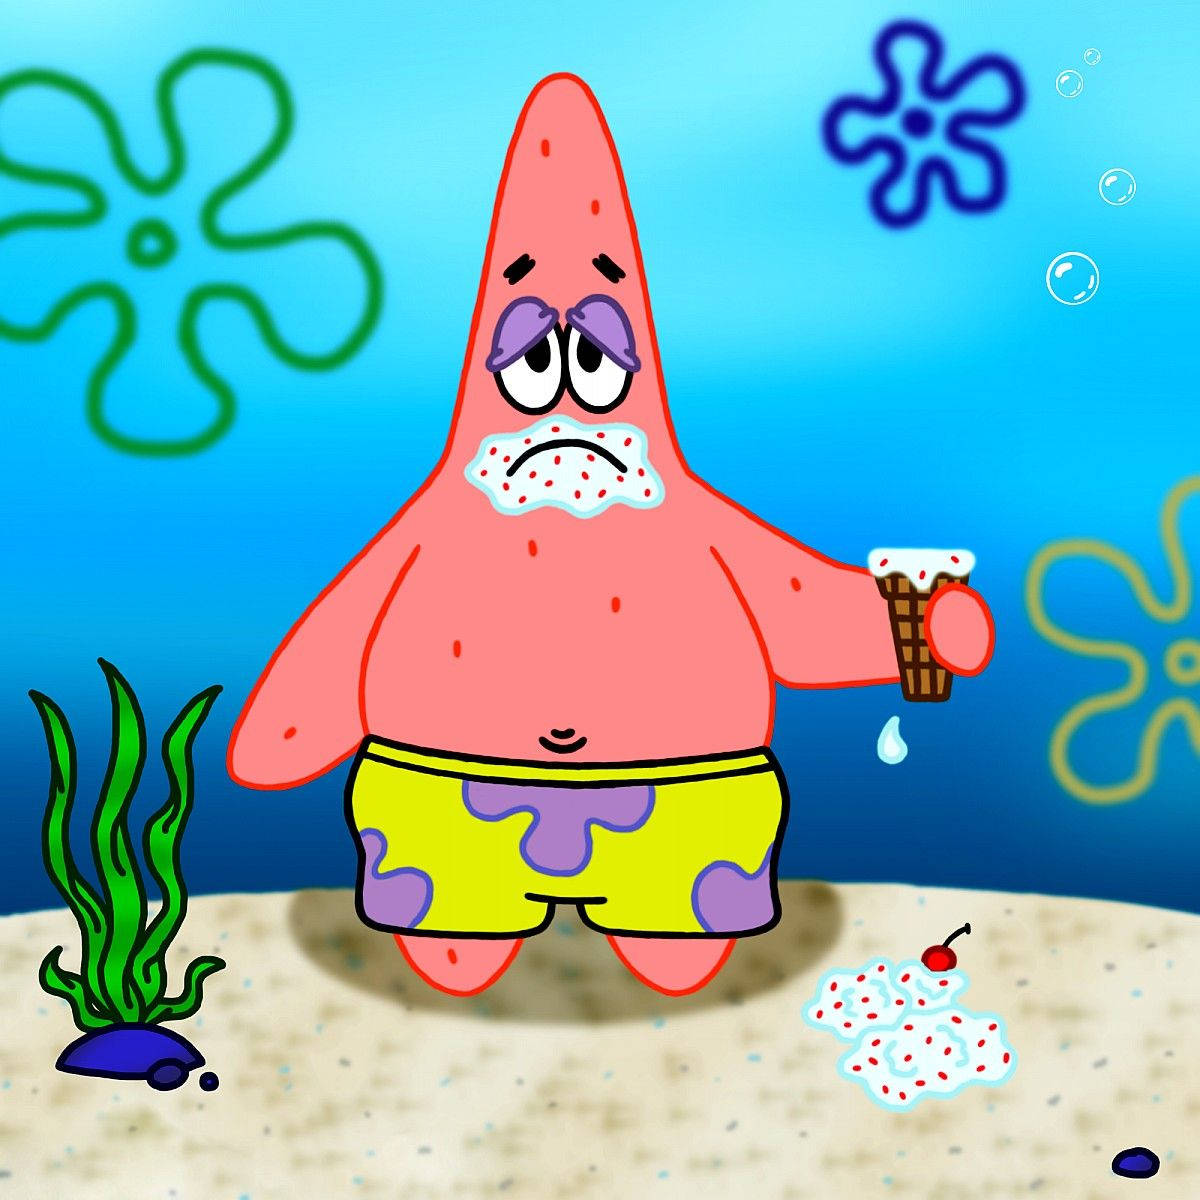 Clumsy Patrick Star With Ice Cream Wallpaper